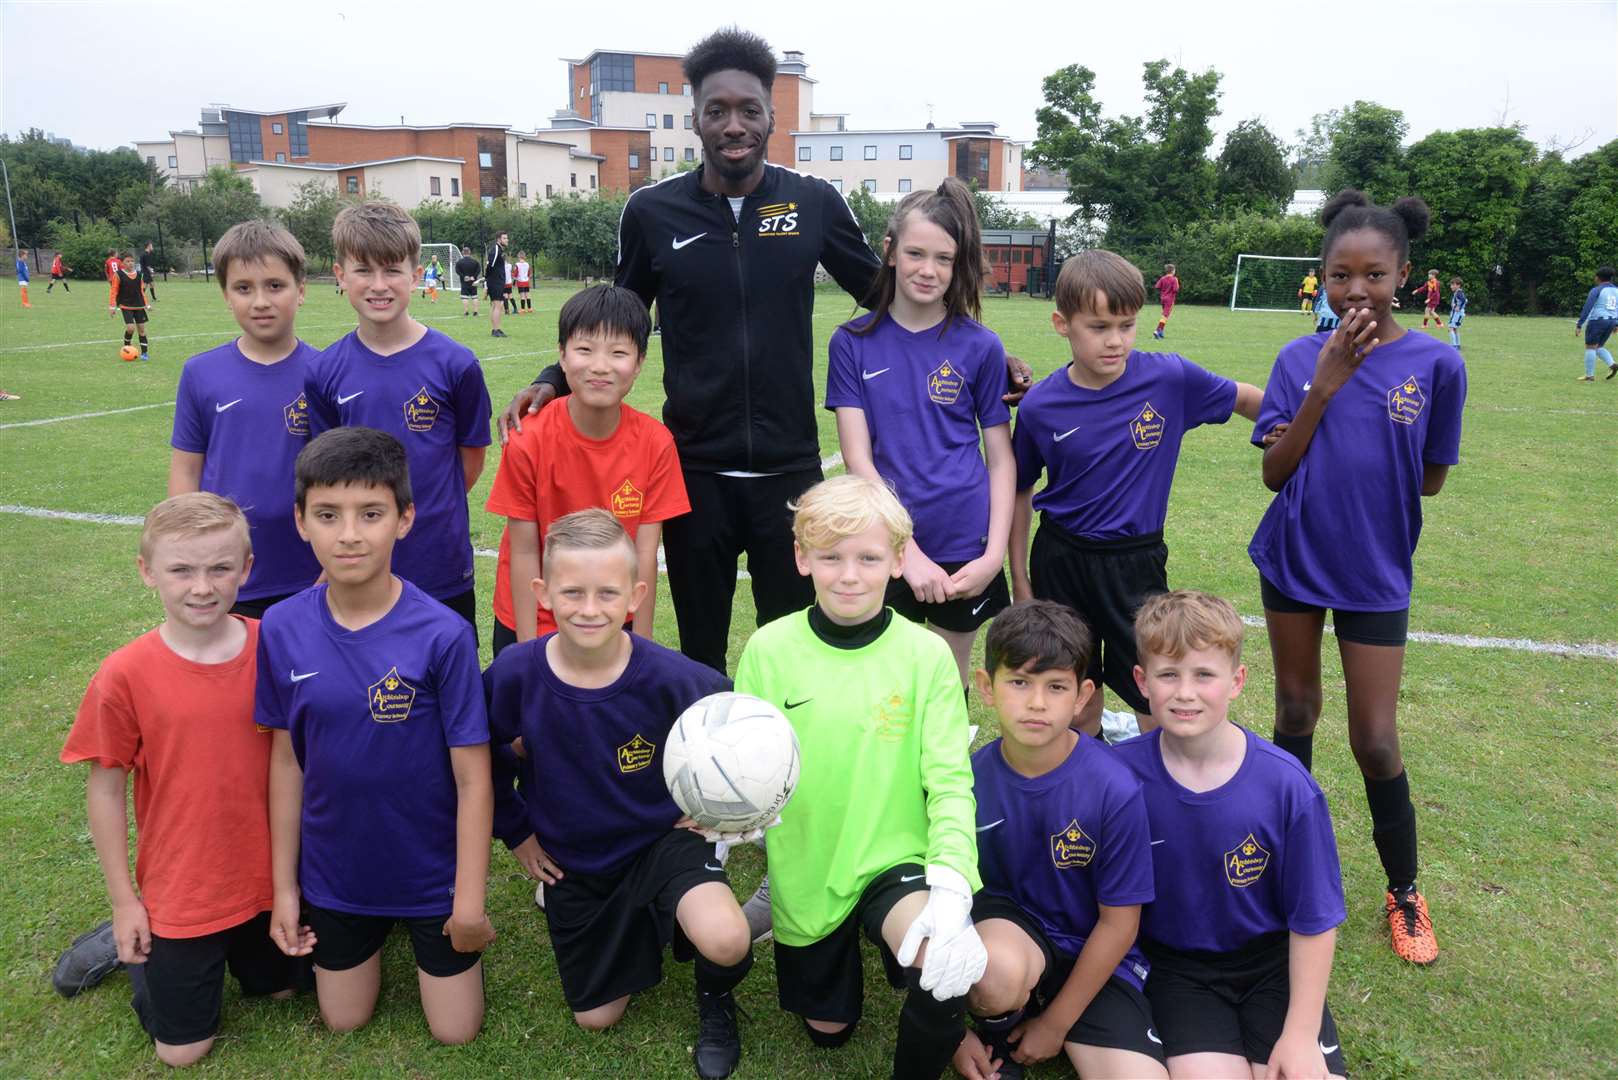 Blair Turgott with the Archbishop Courtenay team at the Aquila Cup youth football tournament held at the Archbishop Courtenay Primary School last summer Picture: Chris Davey